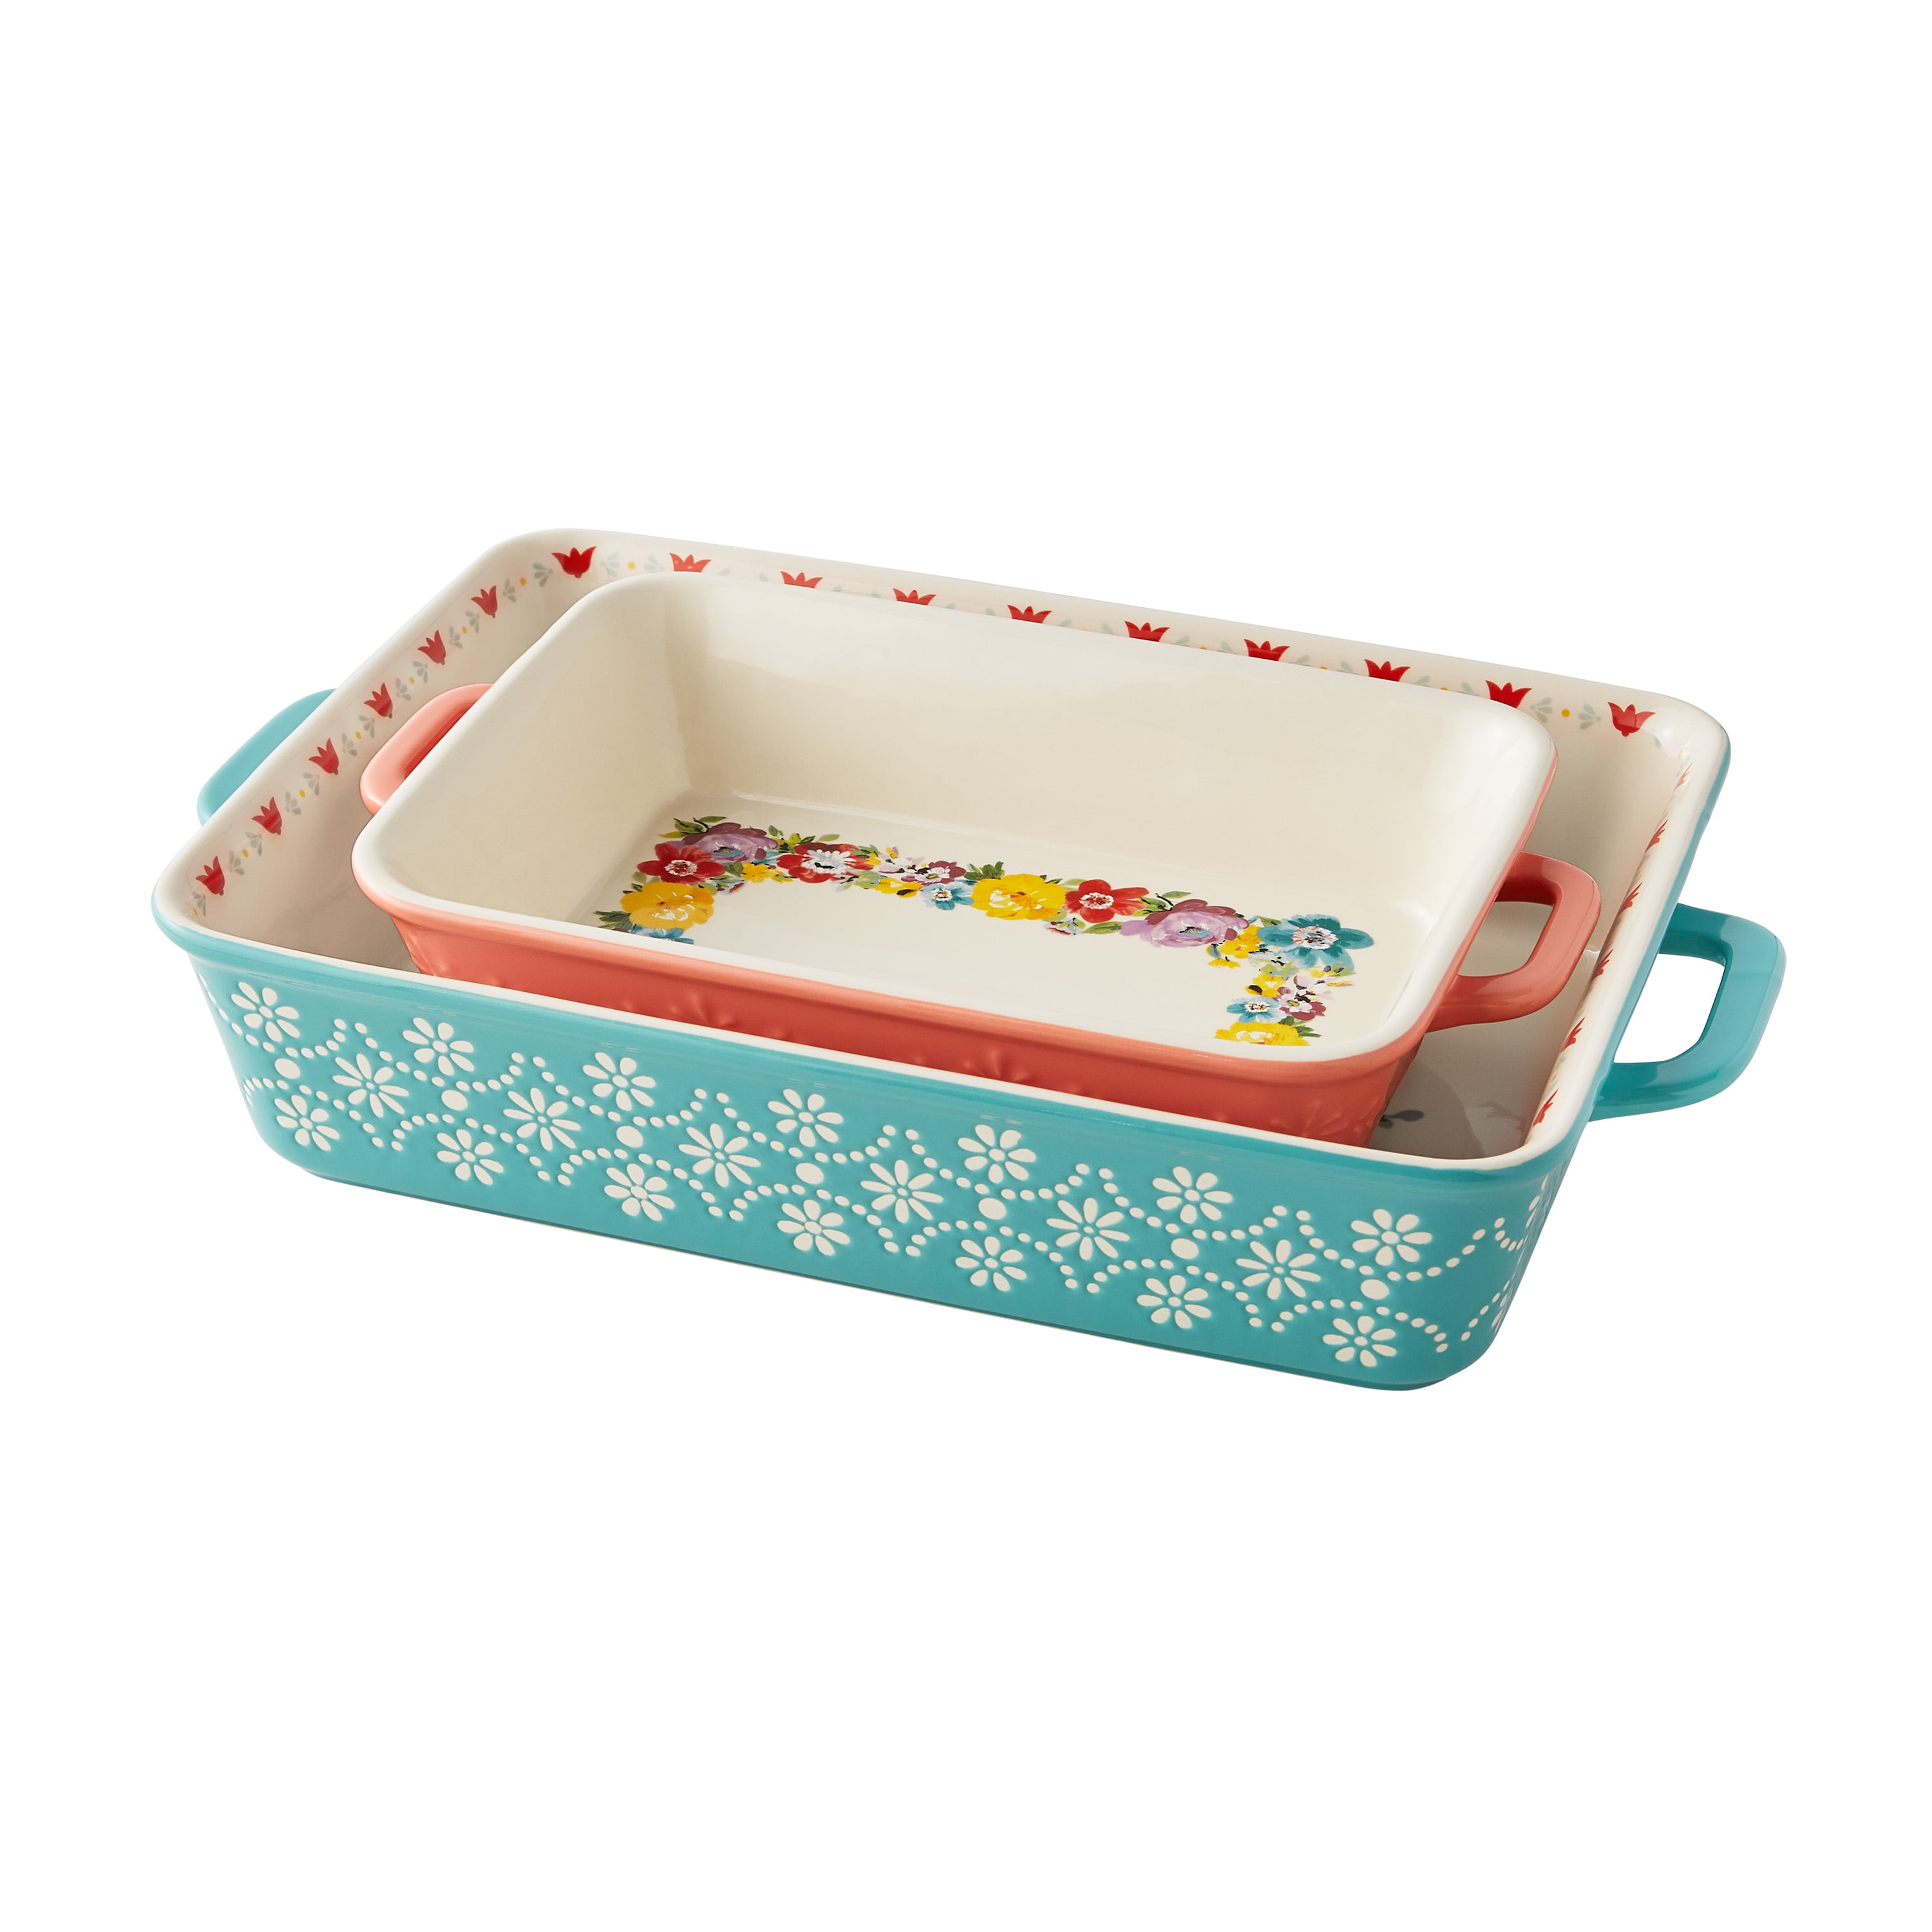 The Pioneer Woman Sweet Romance Cow Square Ceramic Baking Dish - Teal - 8 x 8 in